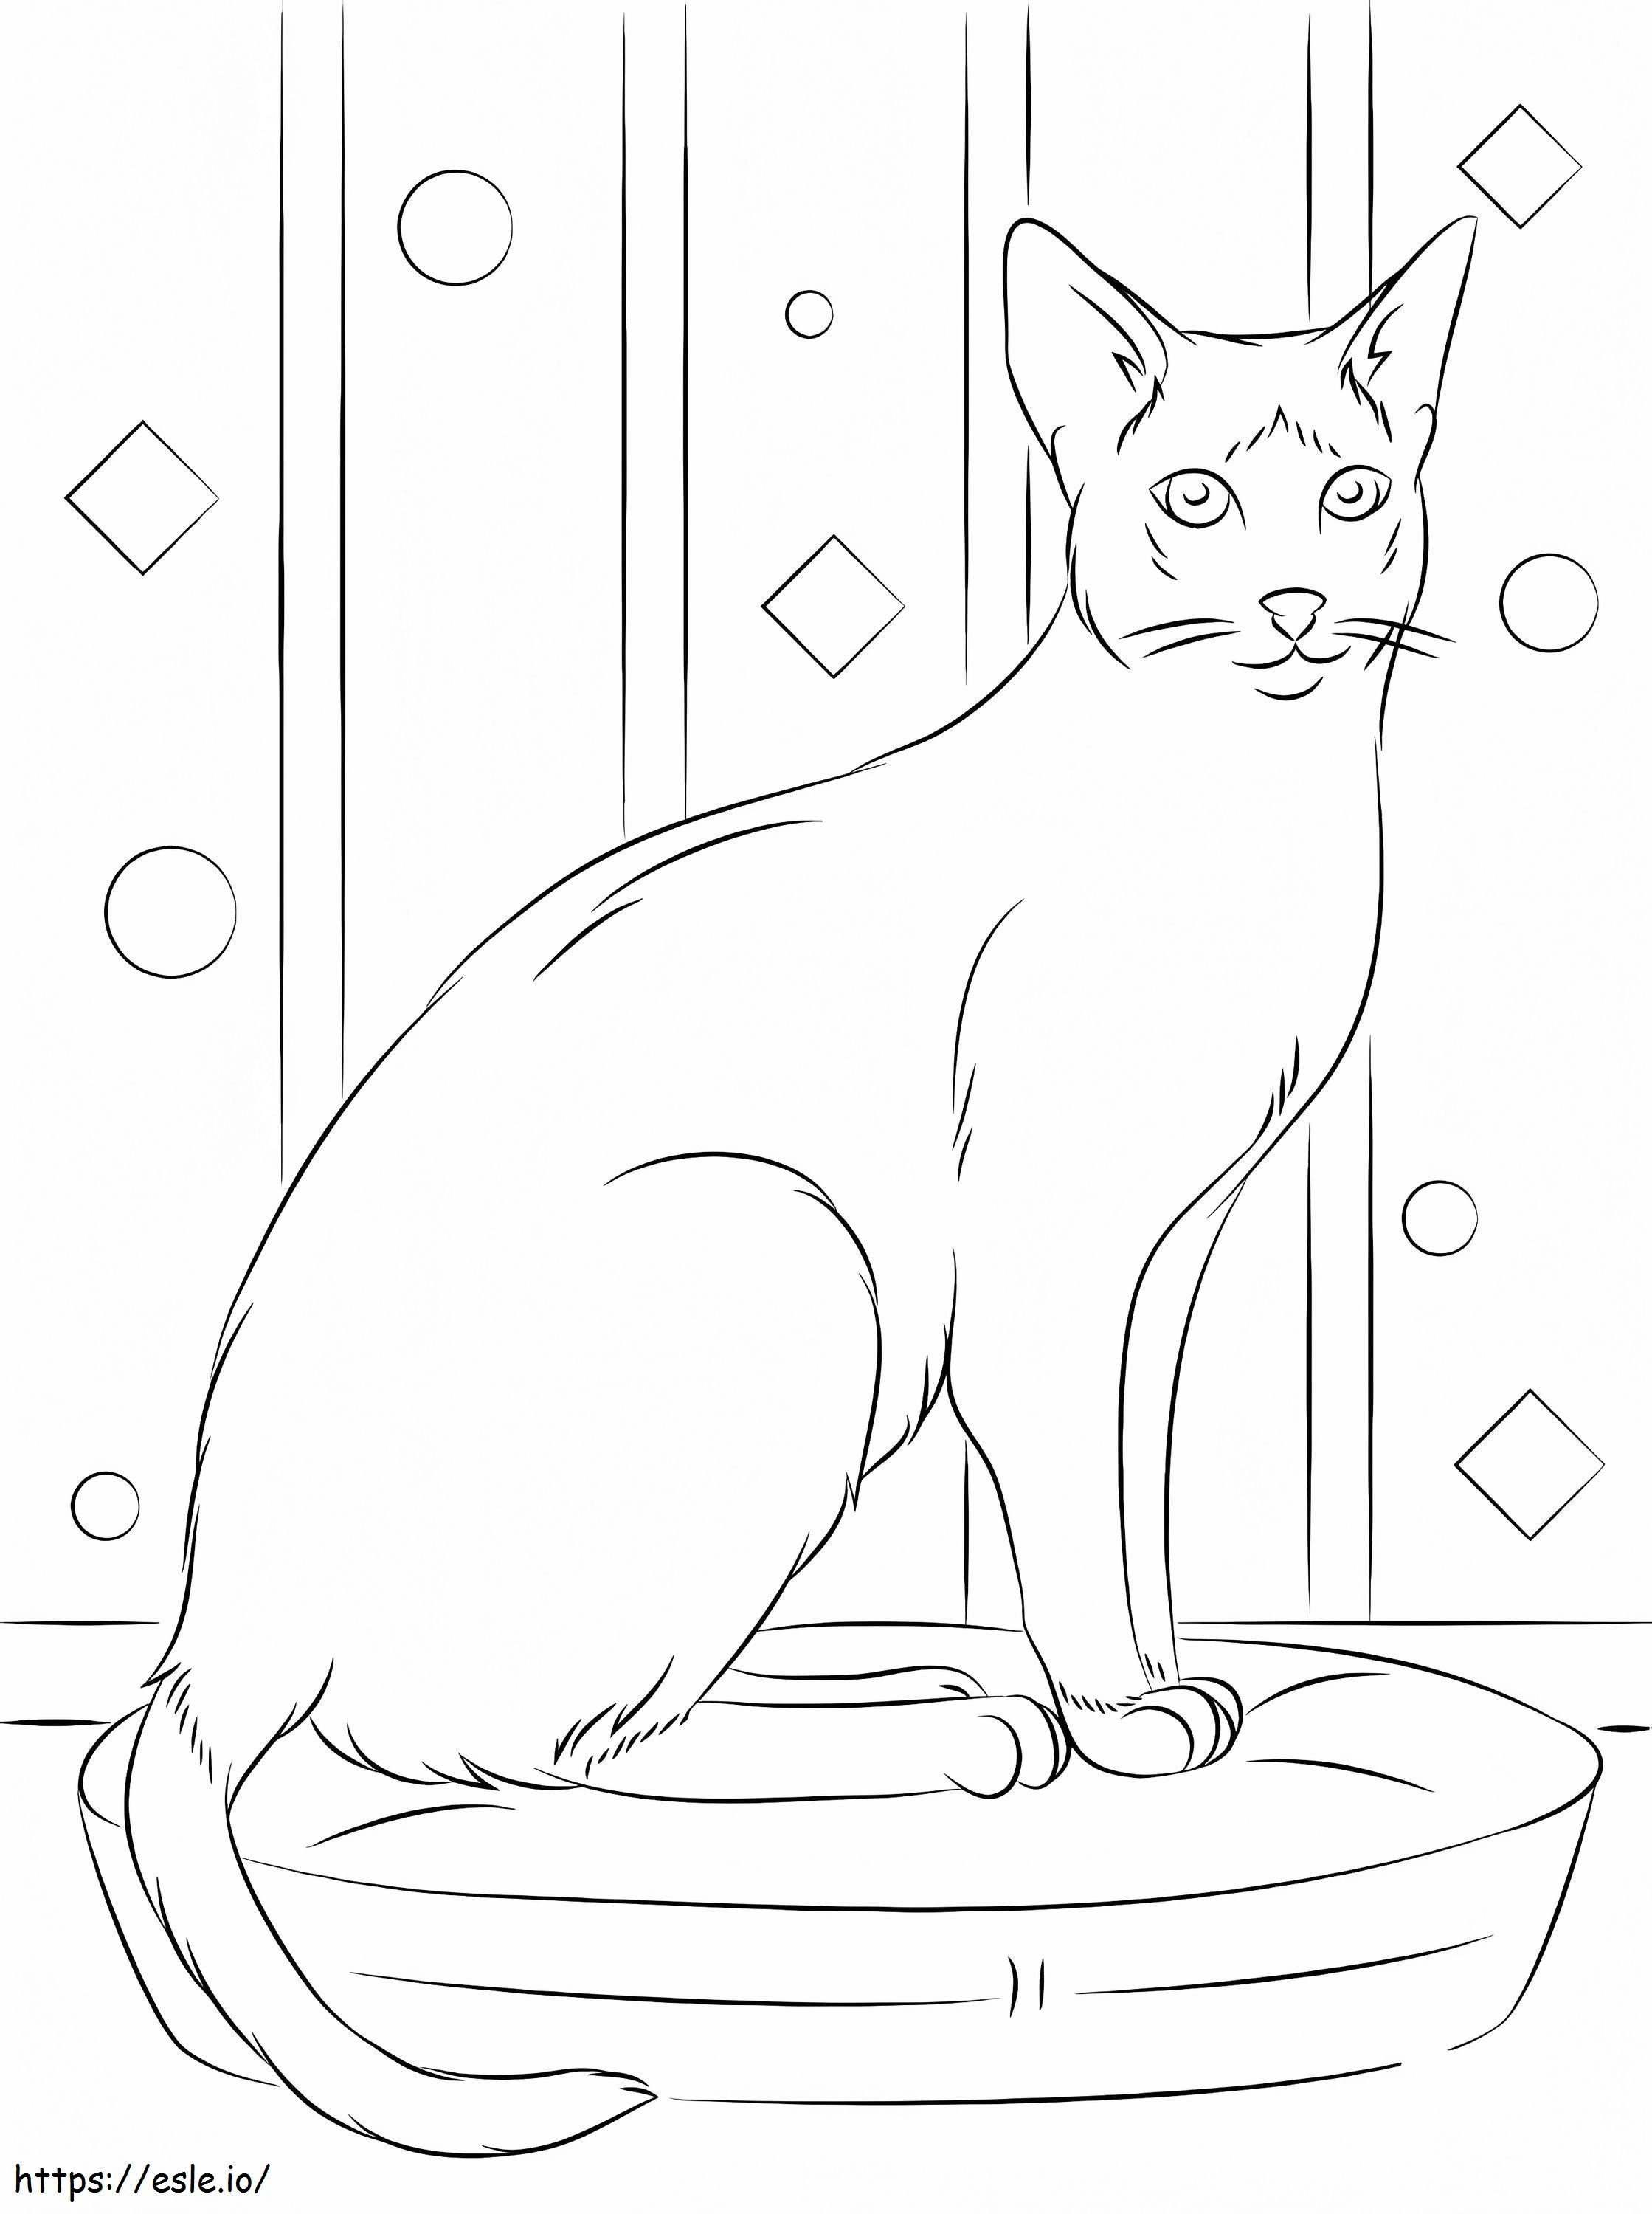 Siamese Cat coloring page